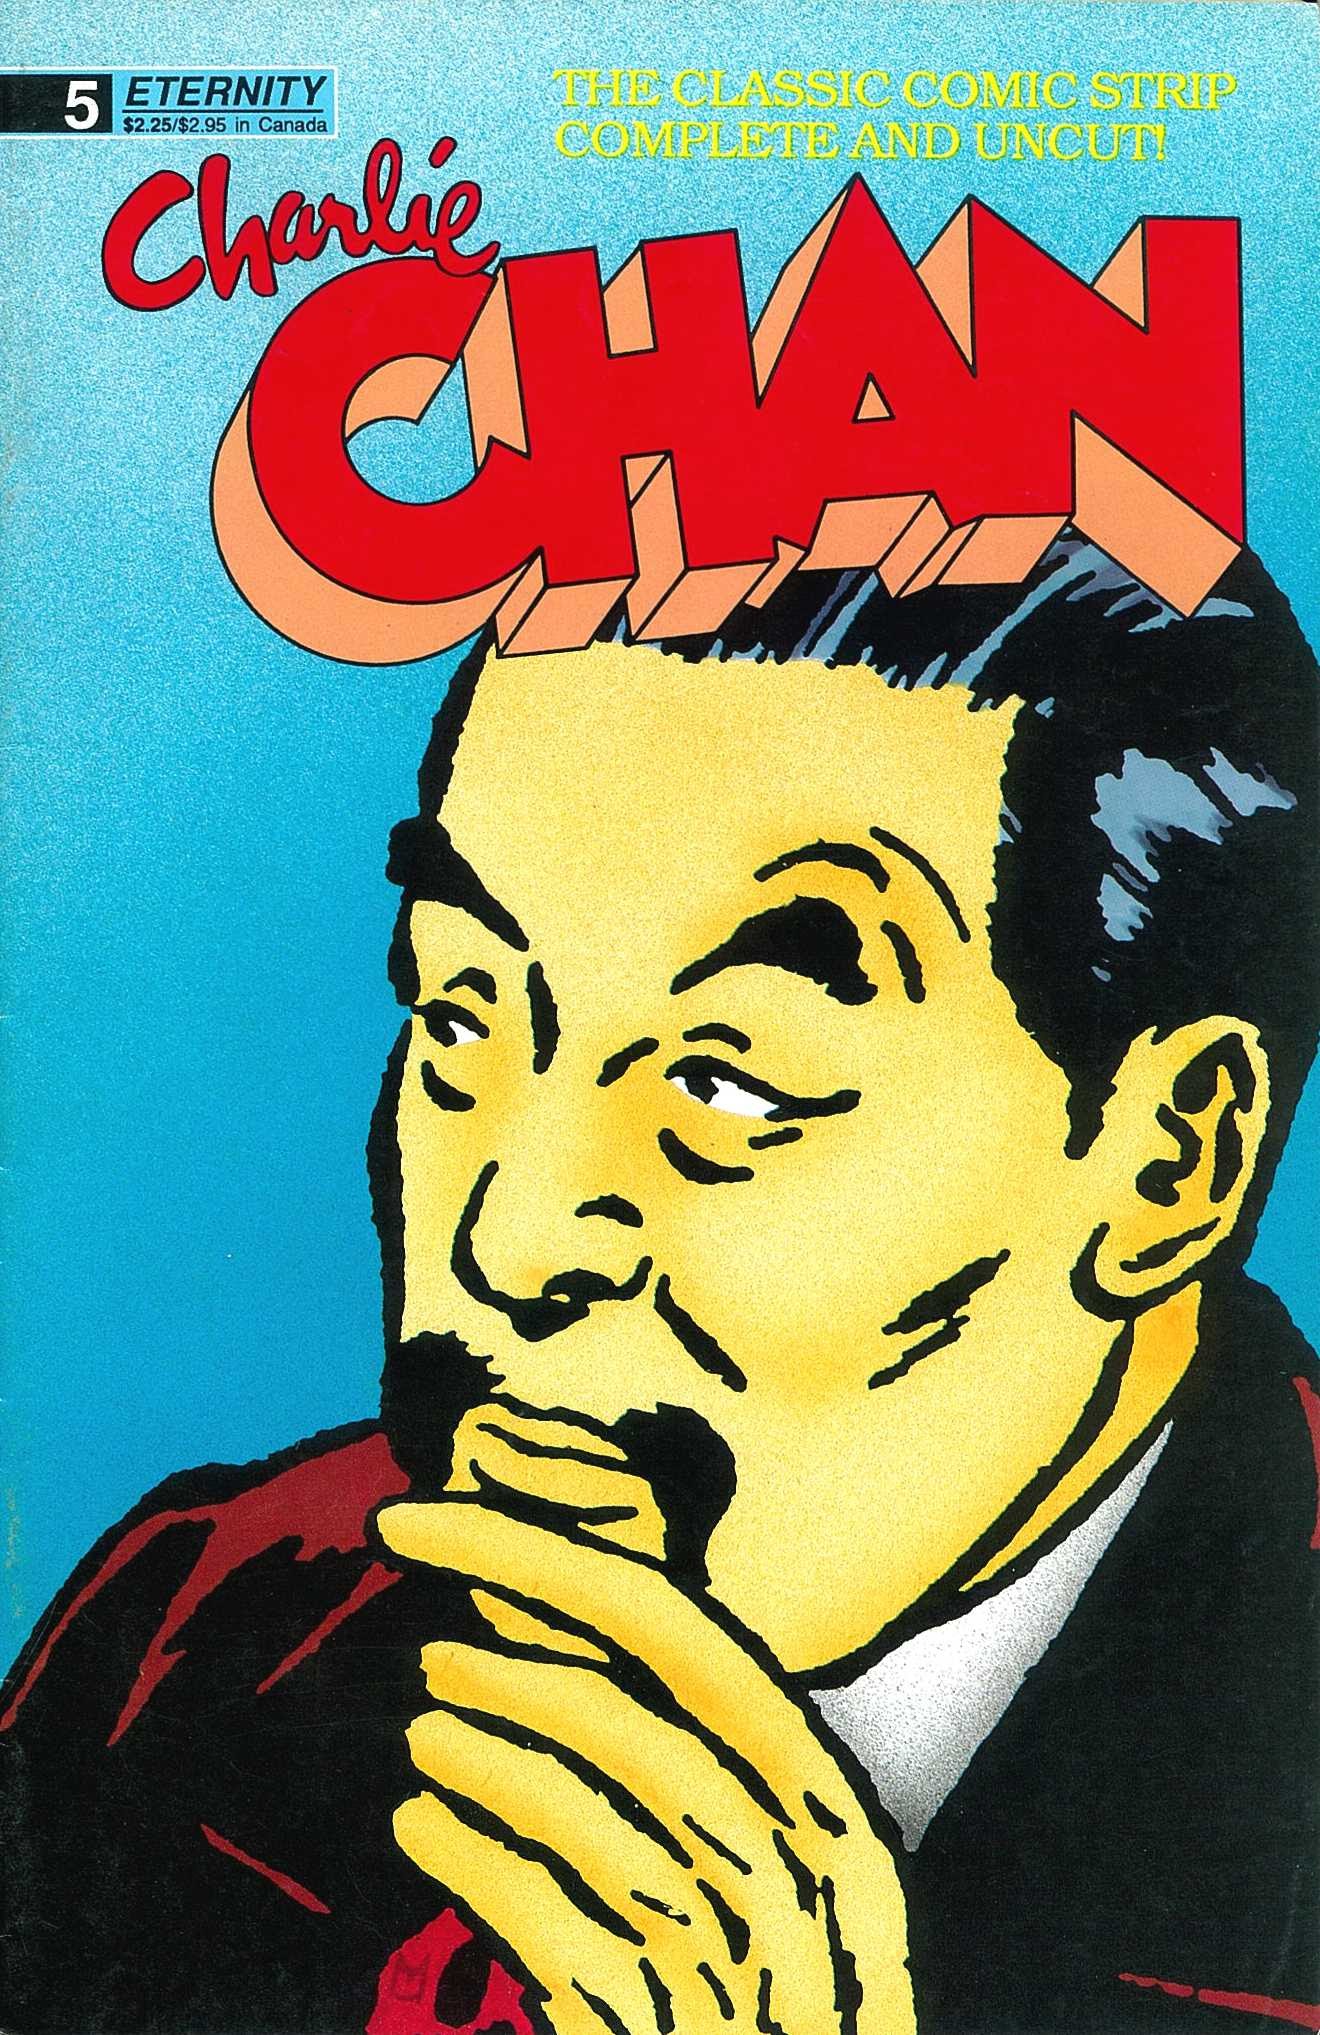 Read online Charlie Chan comic -  Issue #5 - 1